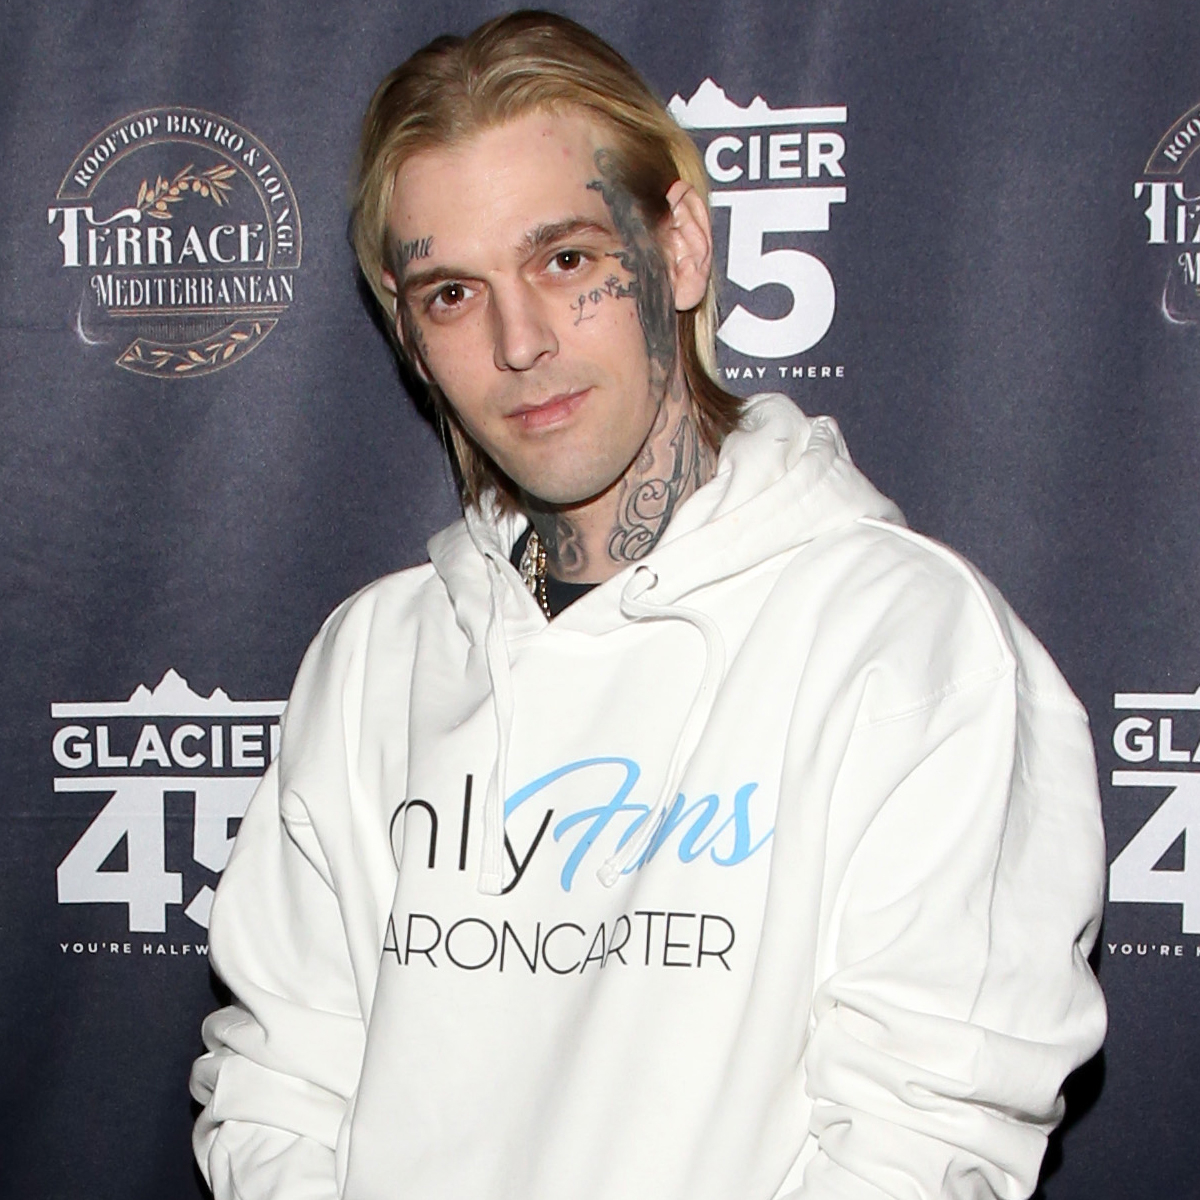 Aaron Carter Dead at 34: Hilary Duff and Others Pay Tribute to Singer